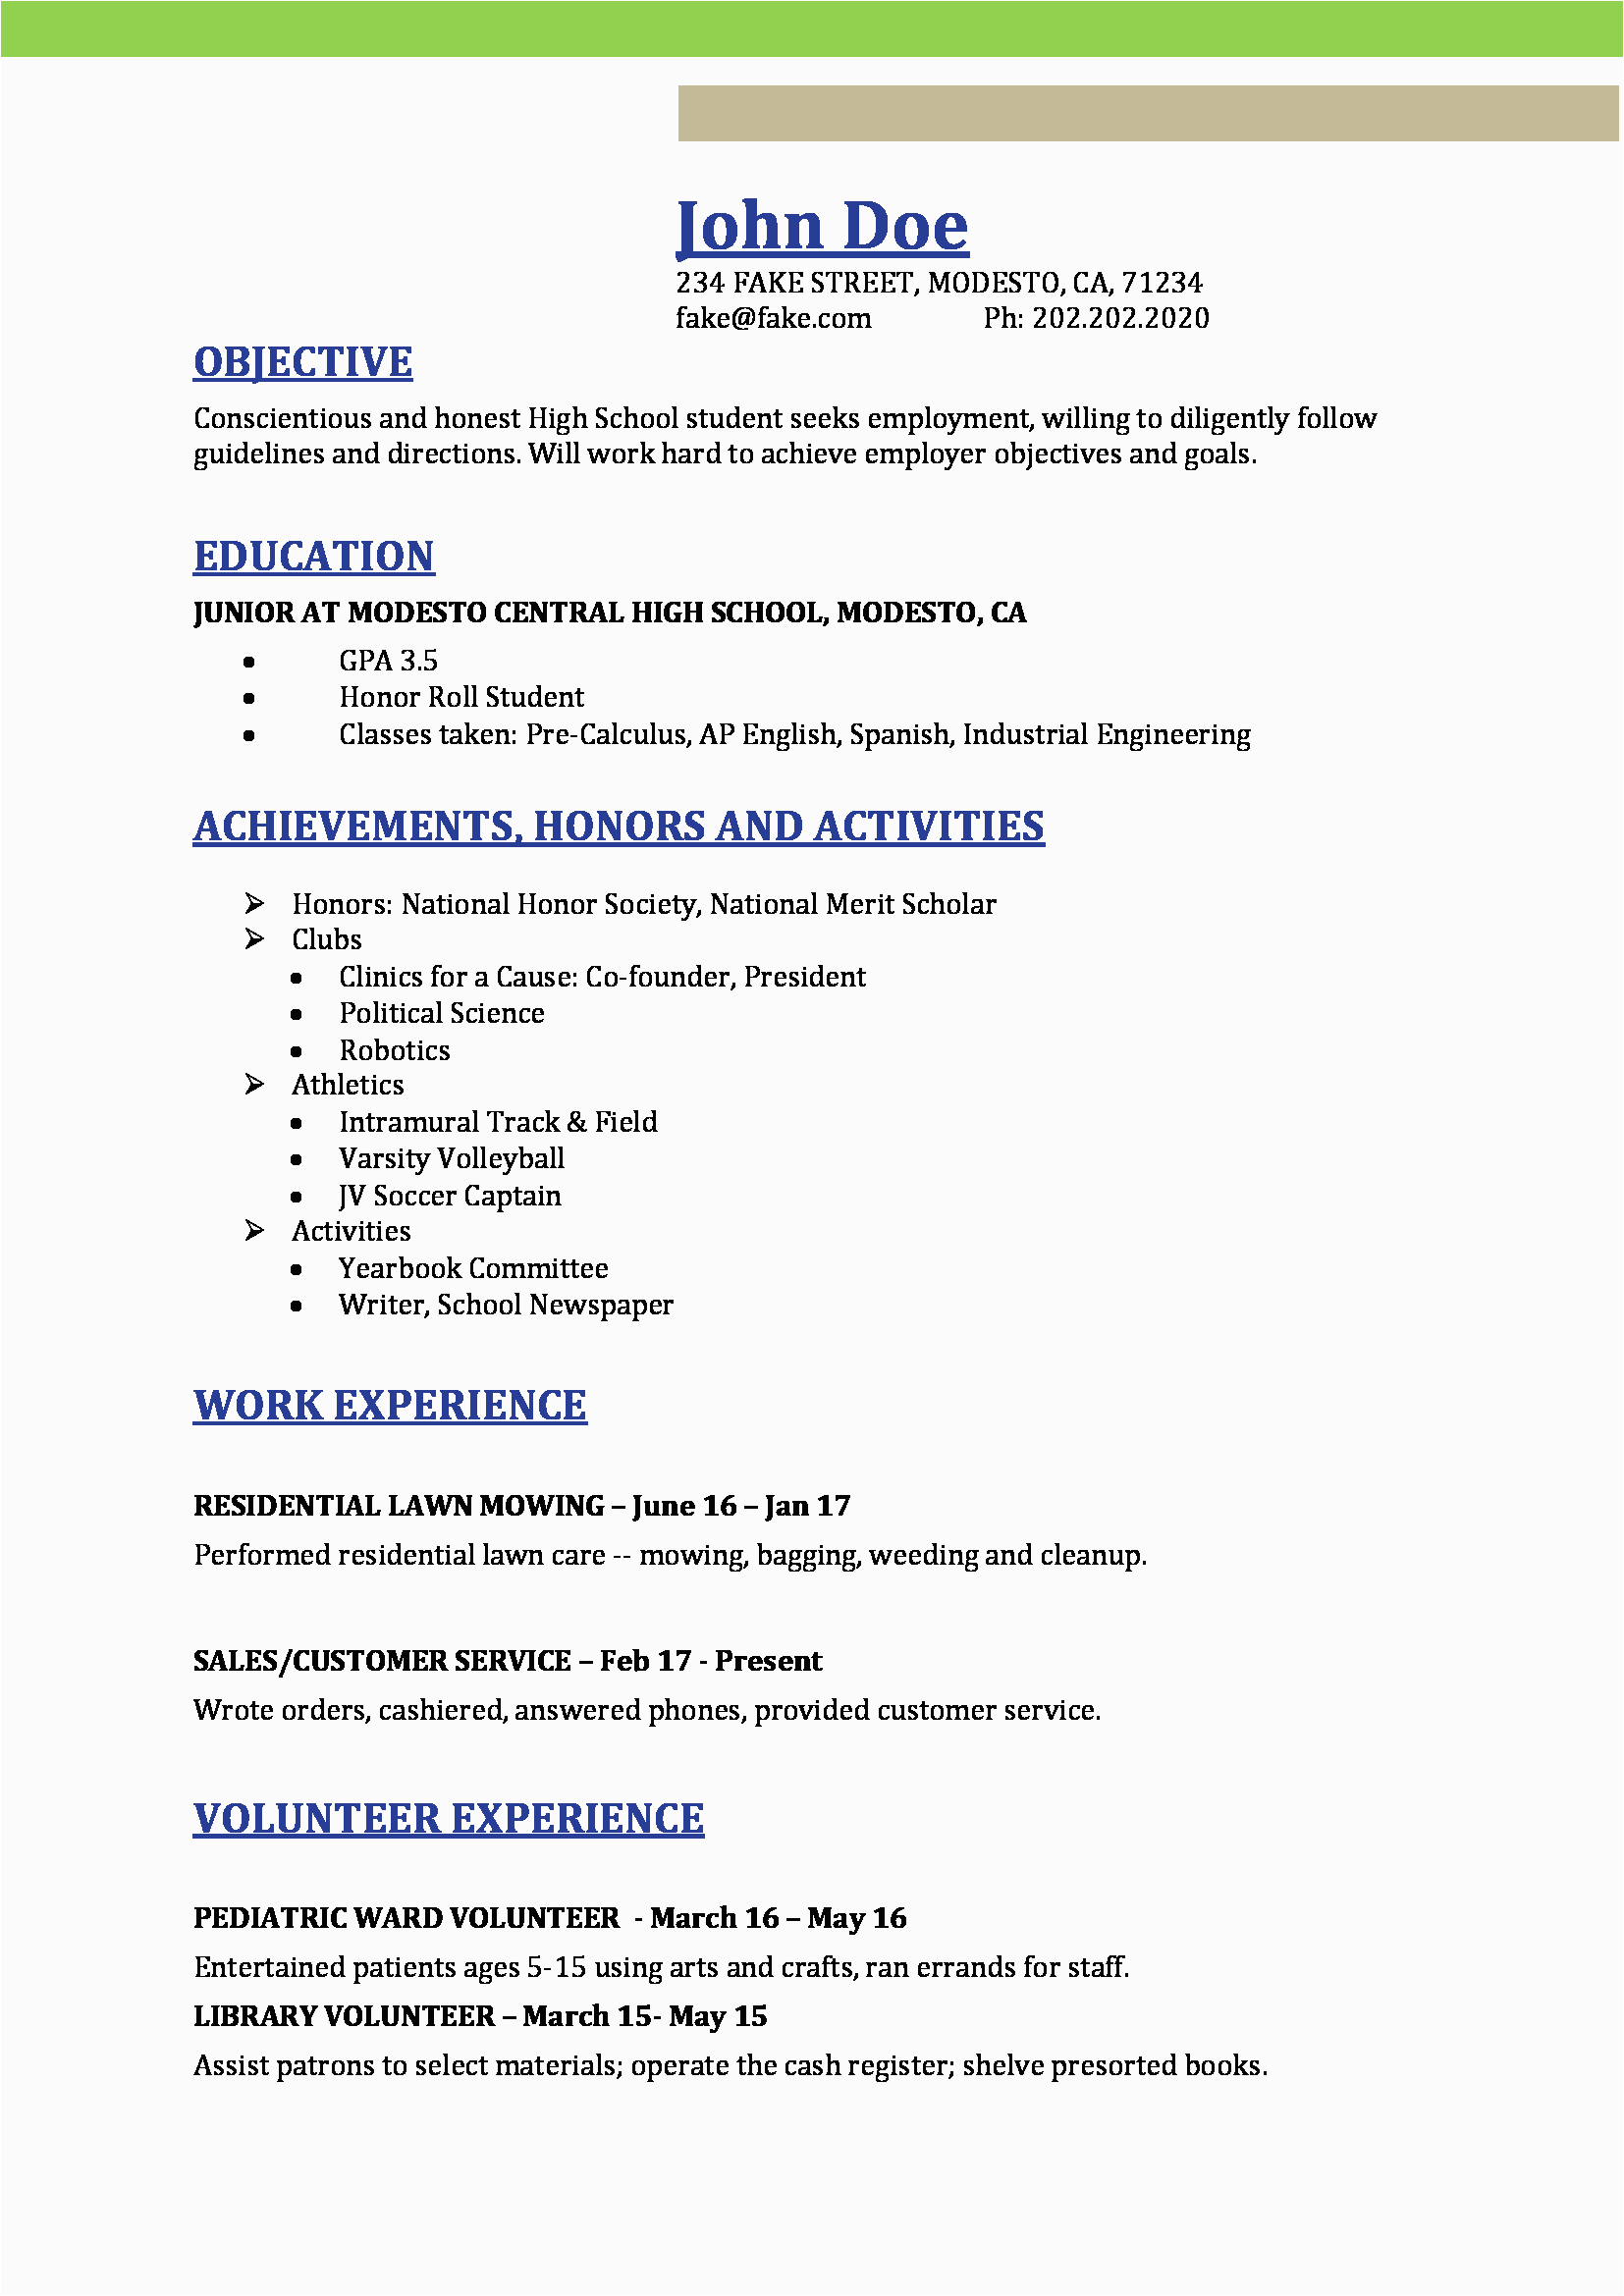 Resume Template for High School Students Australia High School Resume Resumes Perfect for High School Students